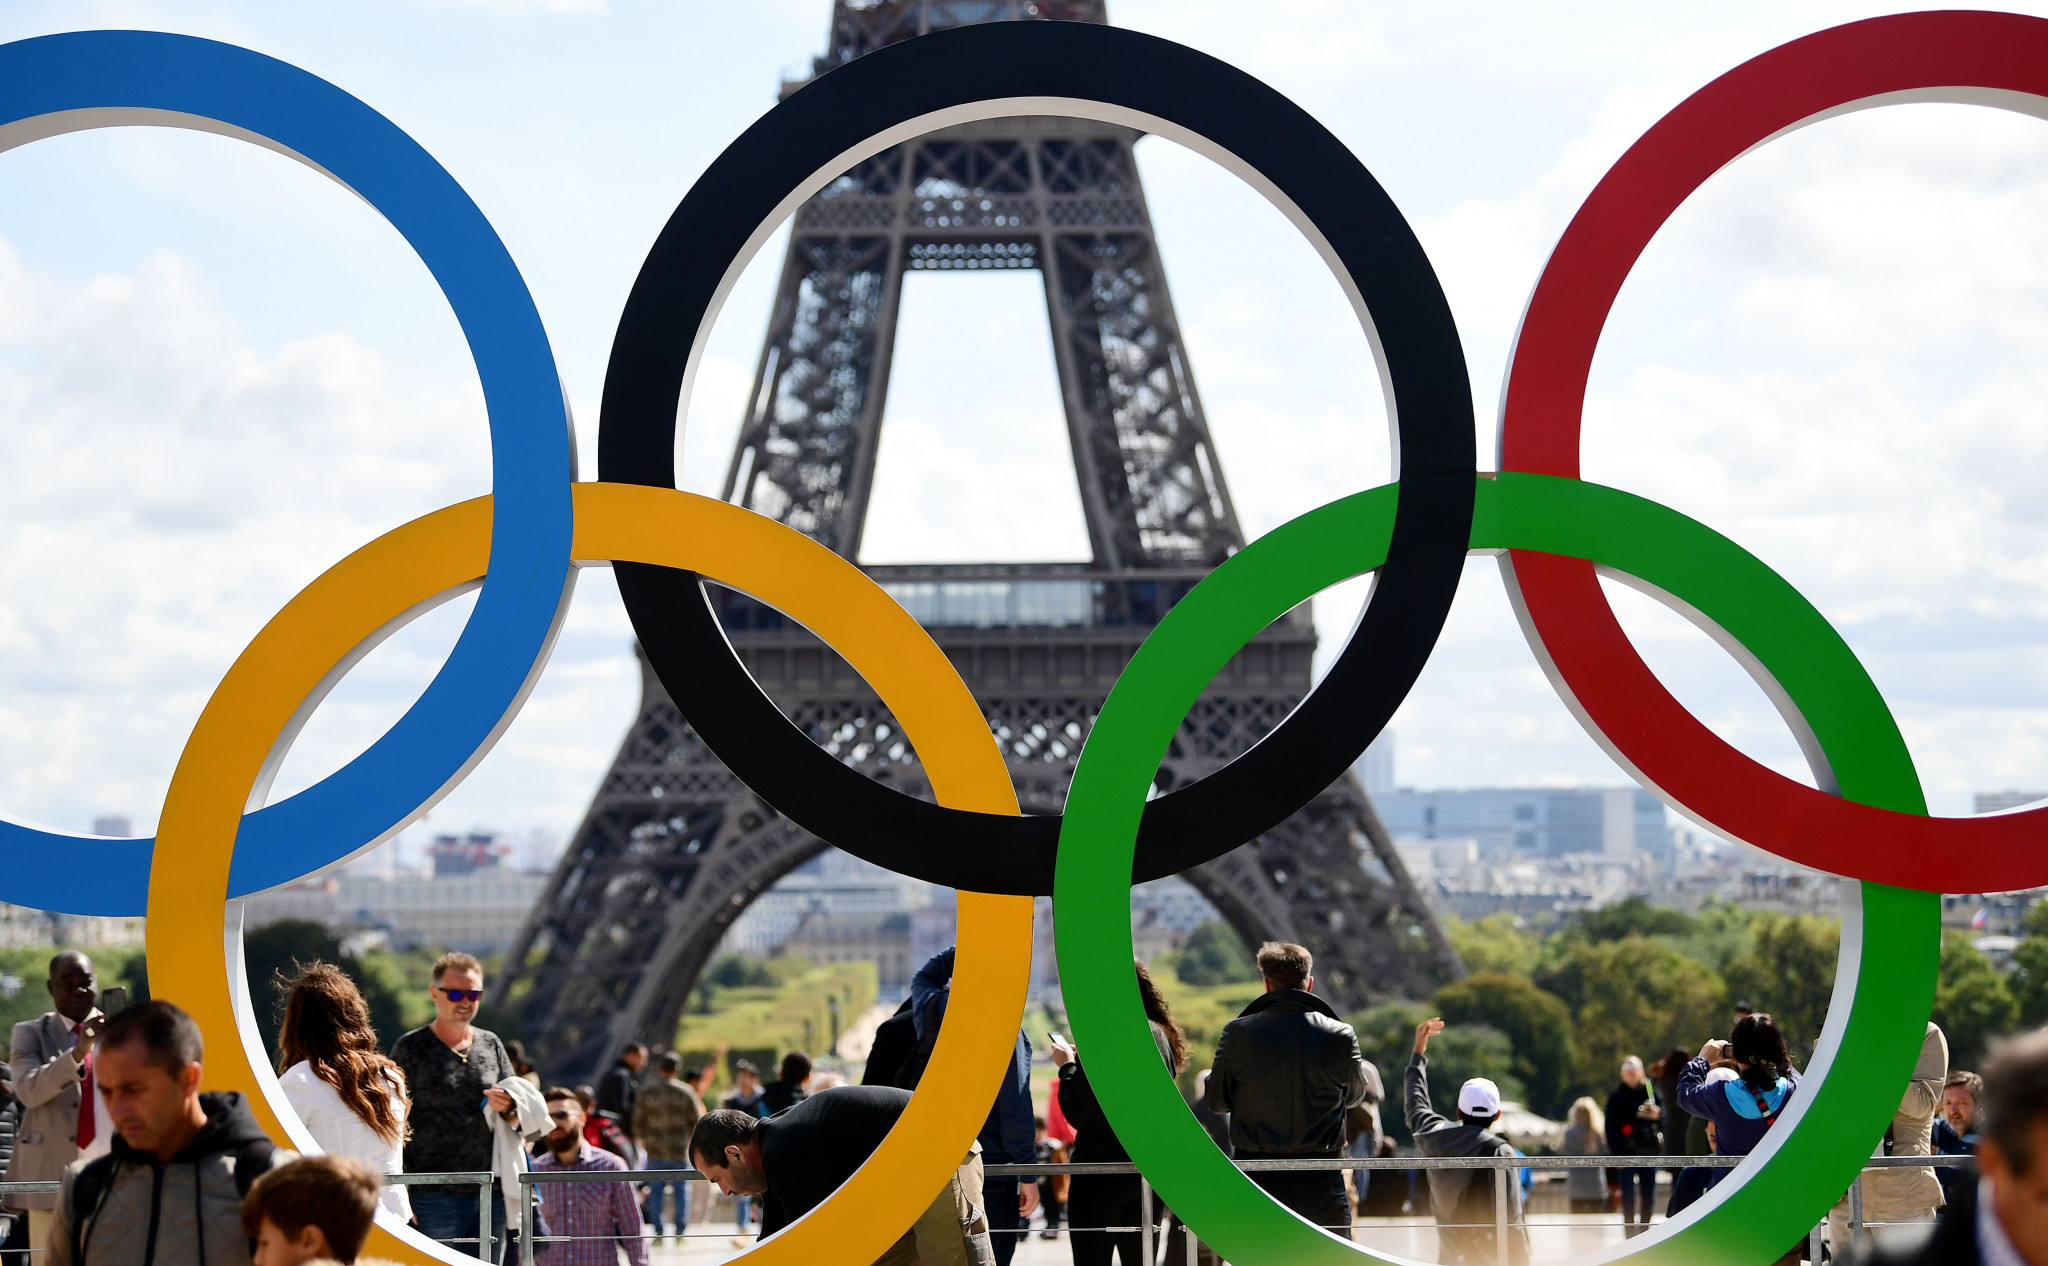 Extra care and support will be on offer to athletes at Paris 2024. GETTY IMAGES